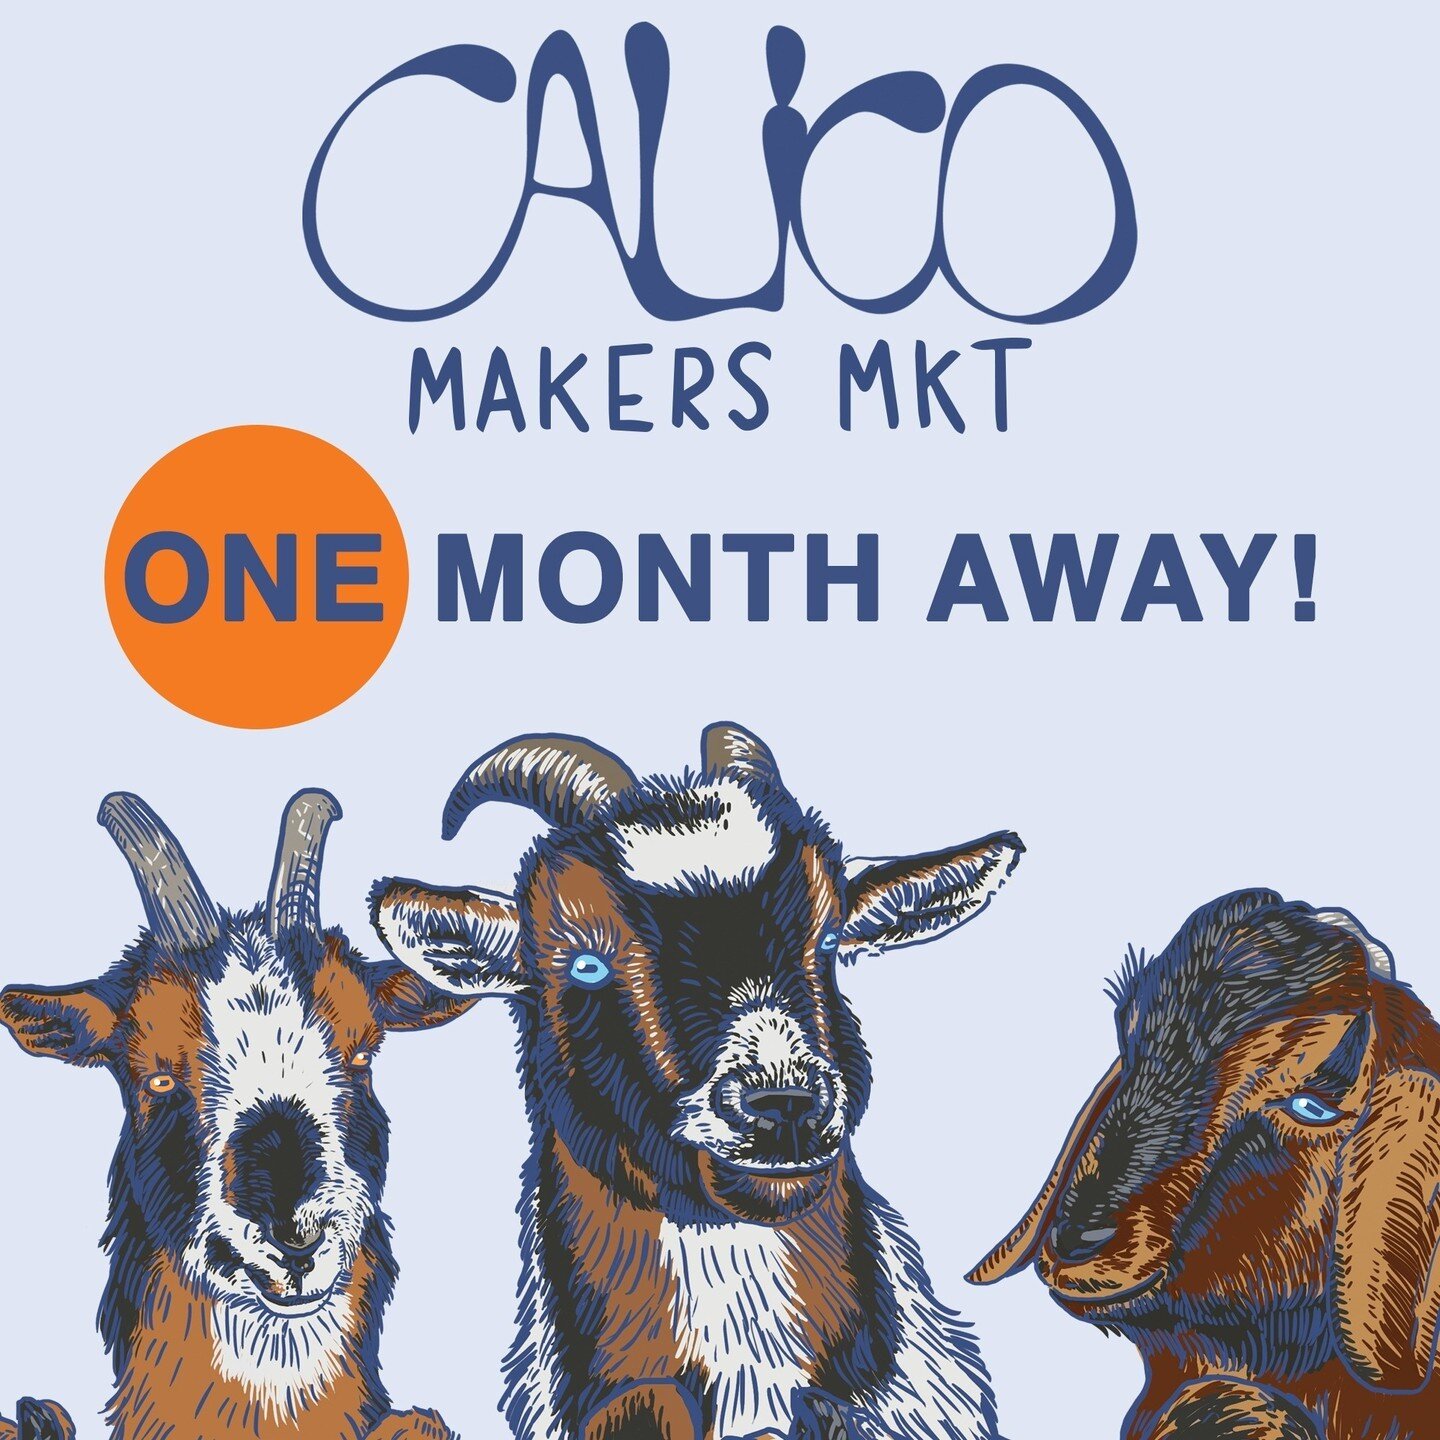 If you haven't already done so, mark your calendars for our Spring 2024 Makers Market this April 27-28! There will be over 25 makers/artists/vendors, two food trucks, art activities, and live music! ⁠
⁠
Our goats will also be very excited to see you 